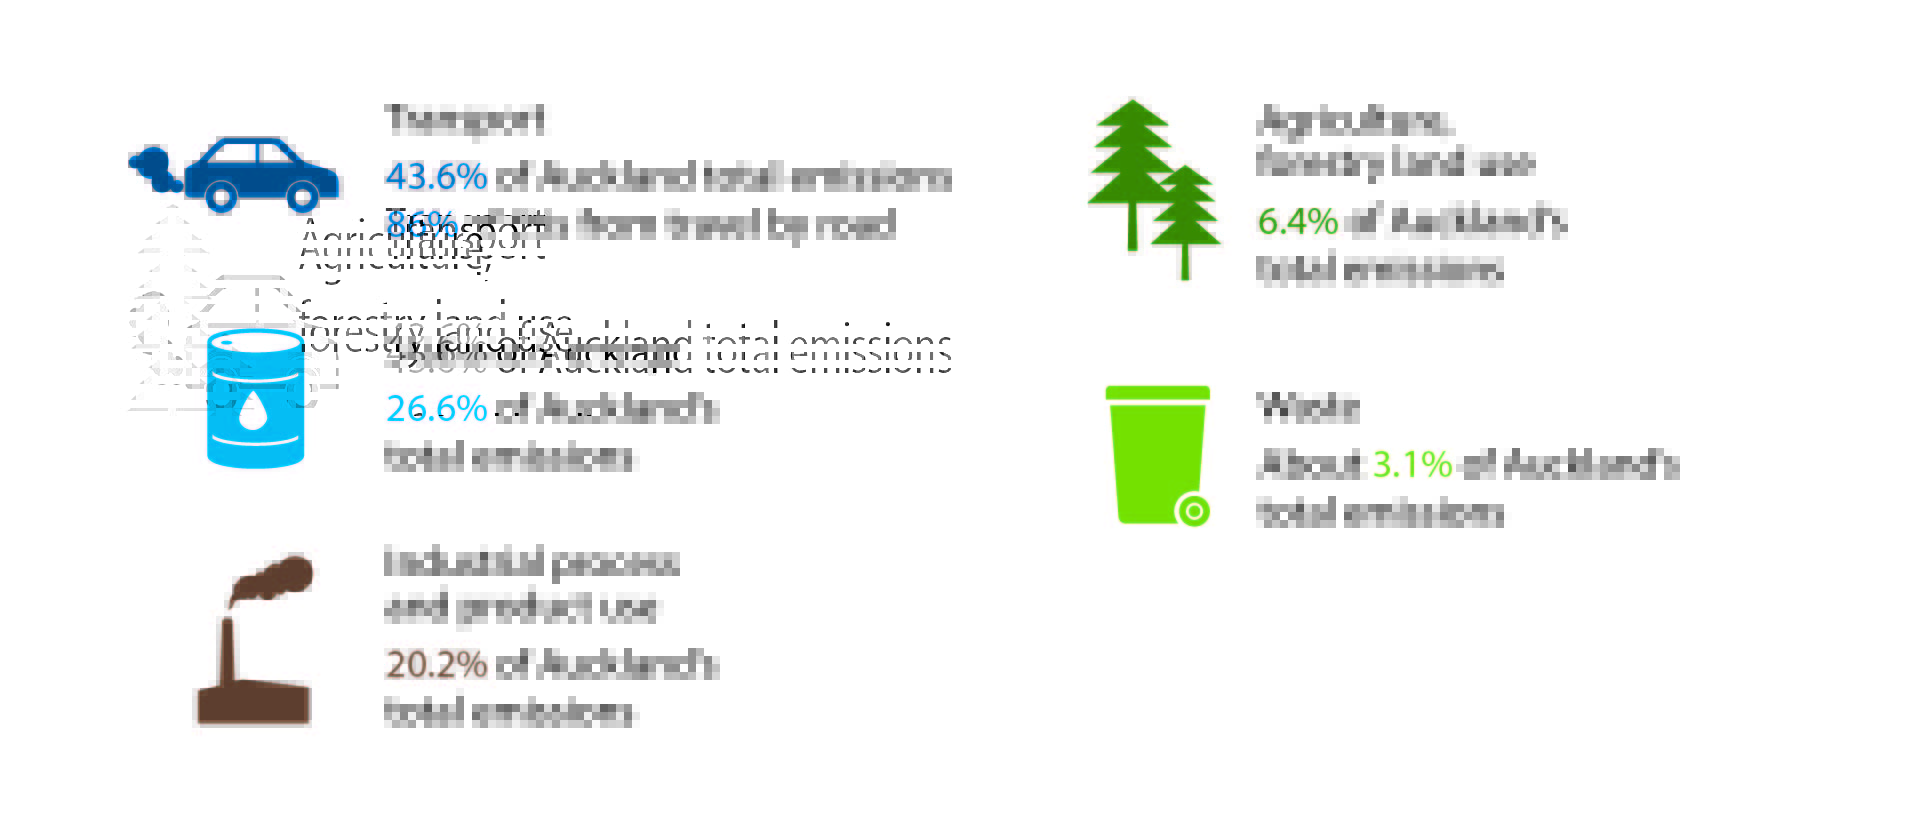 Breakdown of Auckland key emission sources: transport, stationary energy, industrial process, agriculture and forestry, waste.